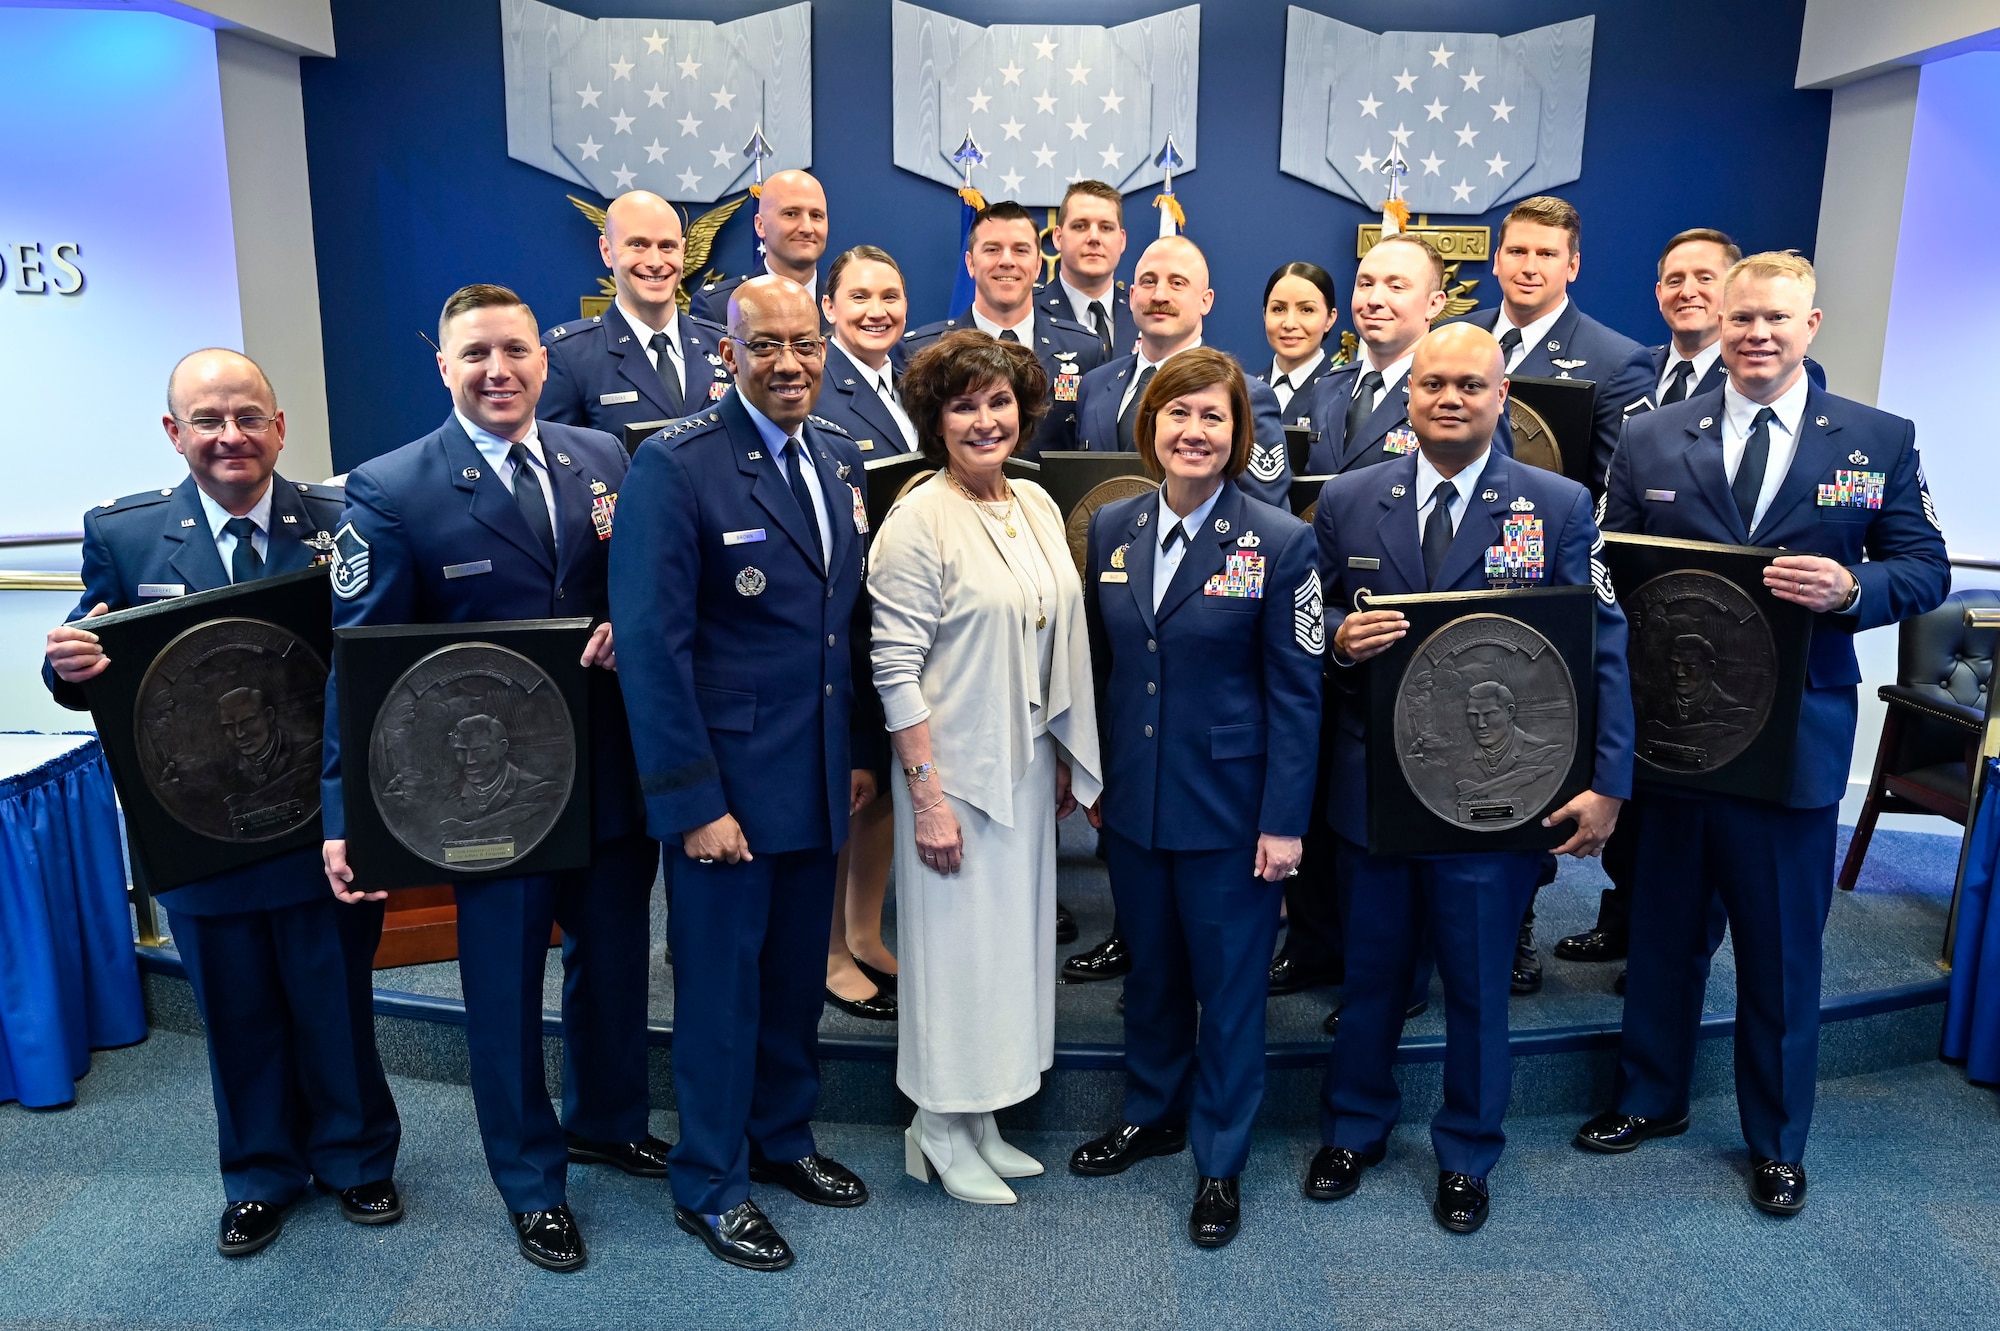 Air Force Chief of Staff Gen. CQ Brown, Jr., third from left, and Chief Master Sgt. of the Air Force JoAnne S. Bass, fifth from left, pose with Janine Sijan, center, and recipients of the 2019 to 2022 Lance P. Sijan USAF Leadership Awards during a ceremony at the Pentagon, Arlington, Va., April 3, 2023. The award is named for Medal of Honor recipient Capt. Lance Sijan, who died while being held as a prisoner of war during the Vietnam War. (U.S. Air Force photo by Eric Dietrich)